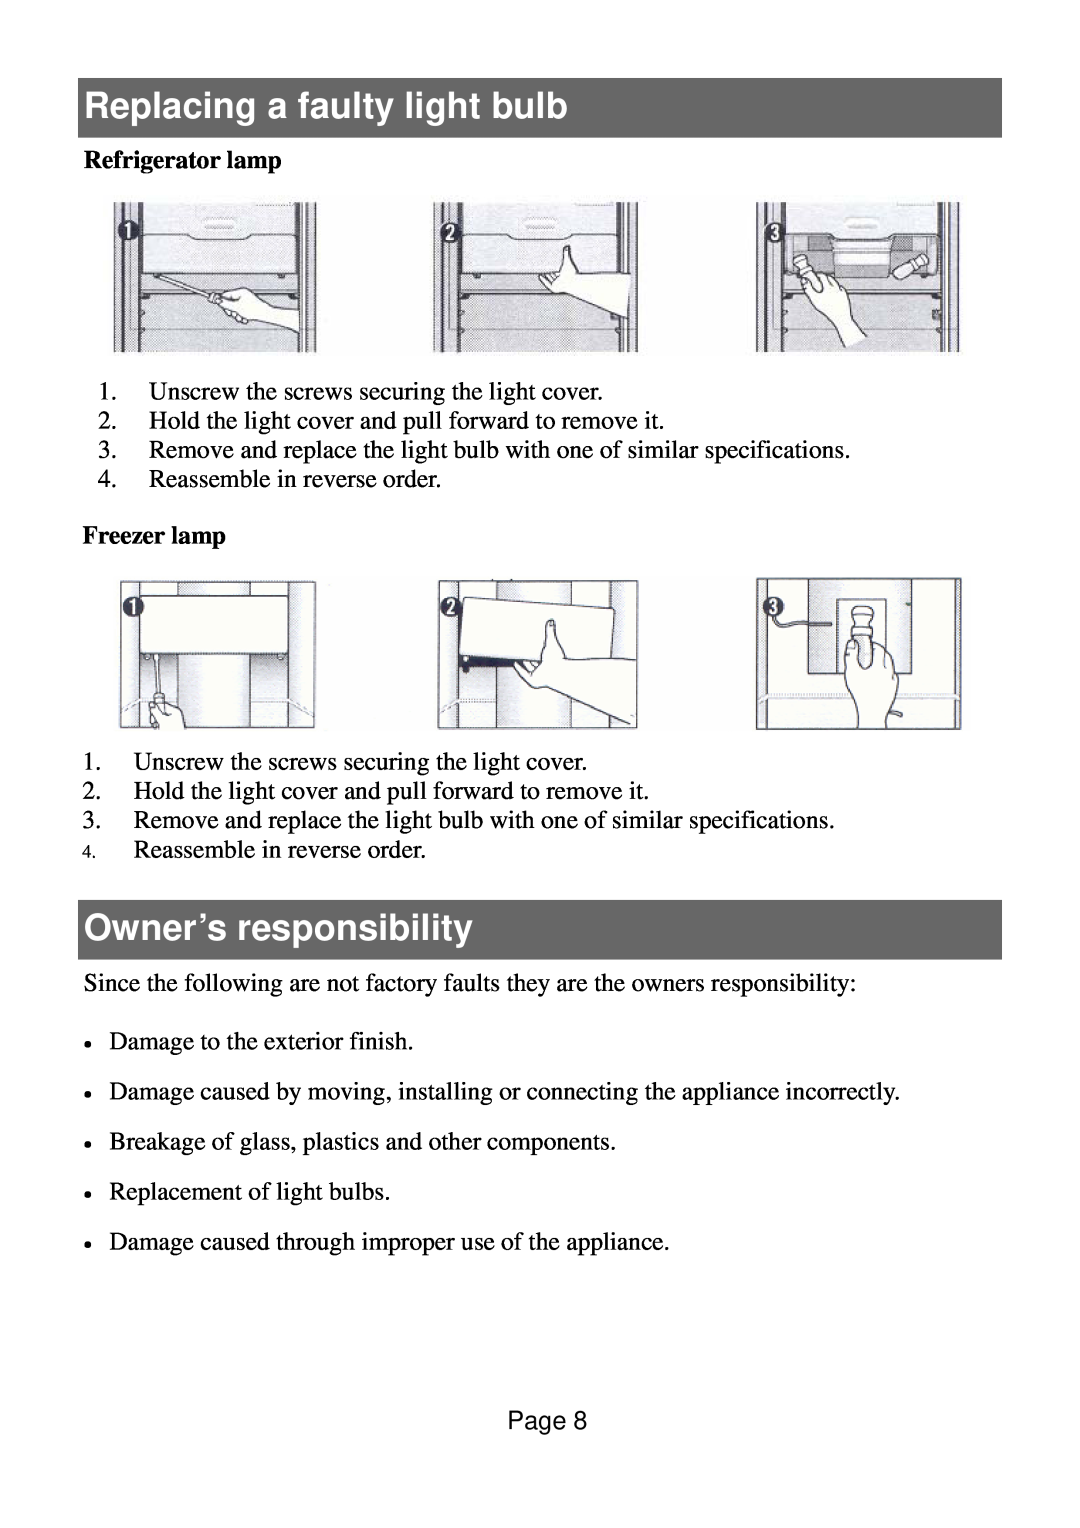 Defy Appliances 570 owner manual Replacing a faulty light bulb, Owner’s responsibility, Refrigerator lamp, Freezer lamp 